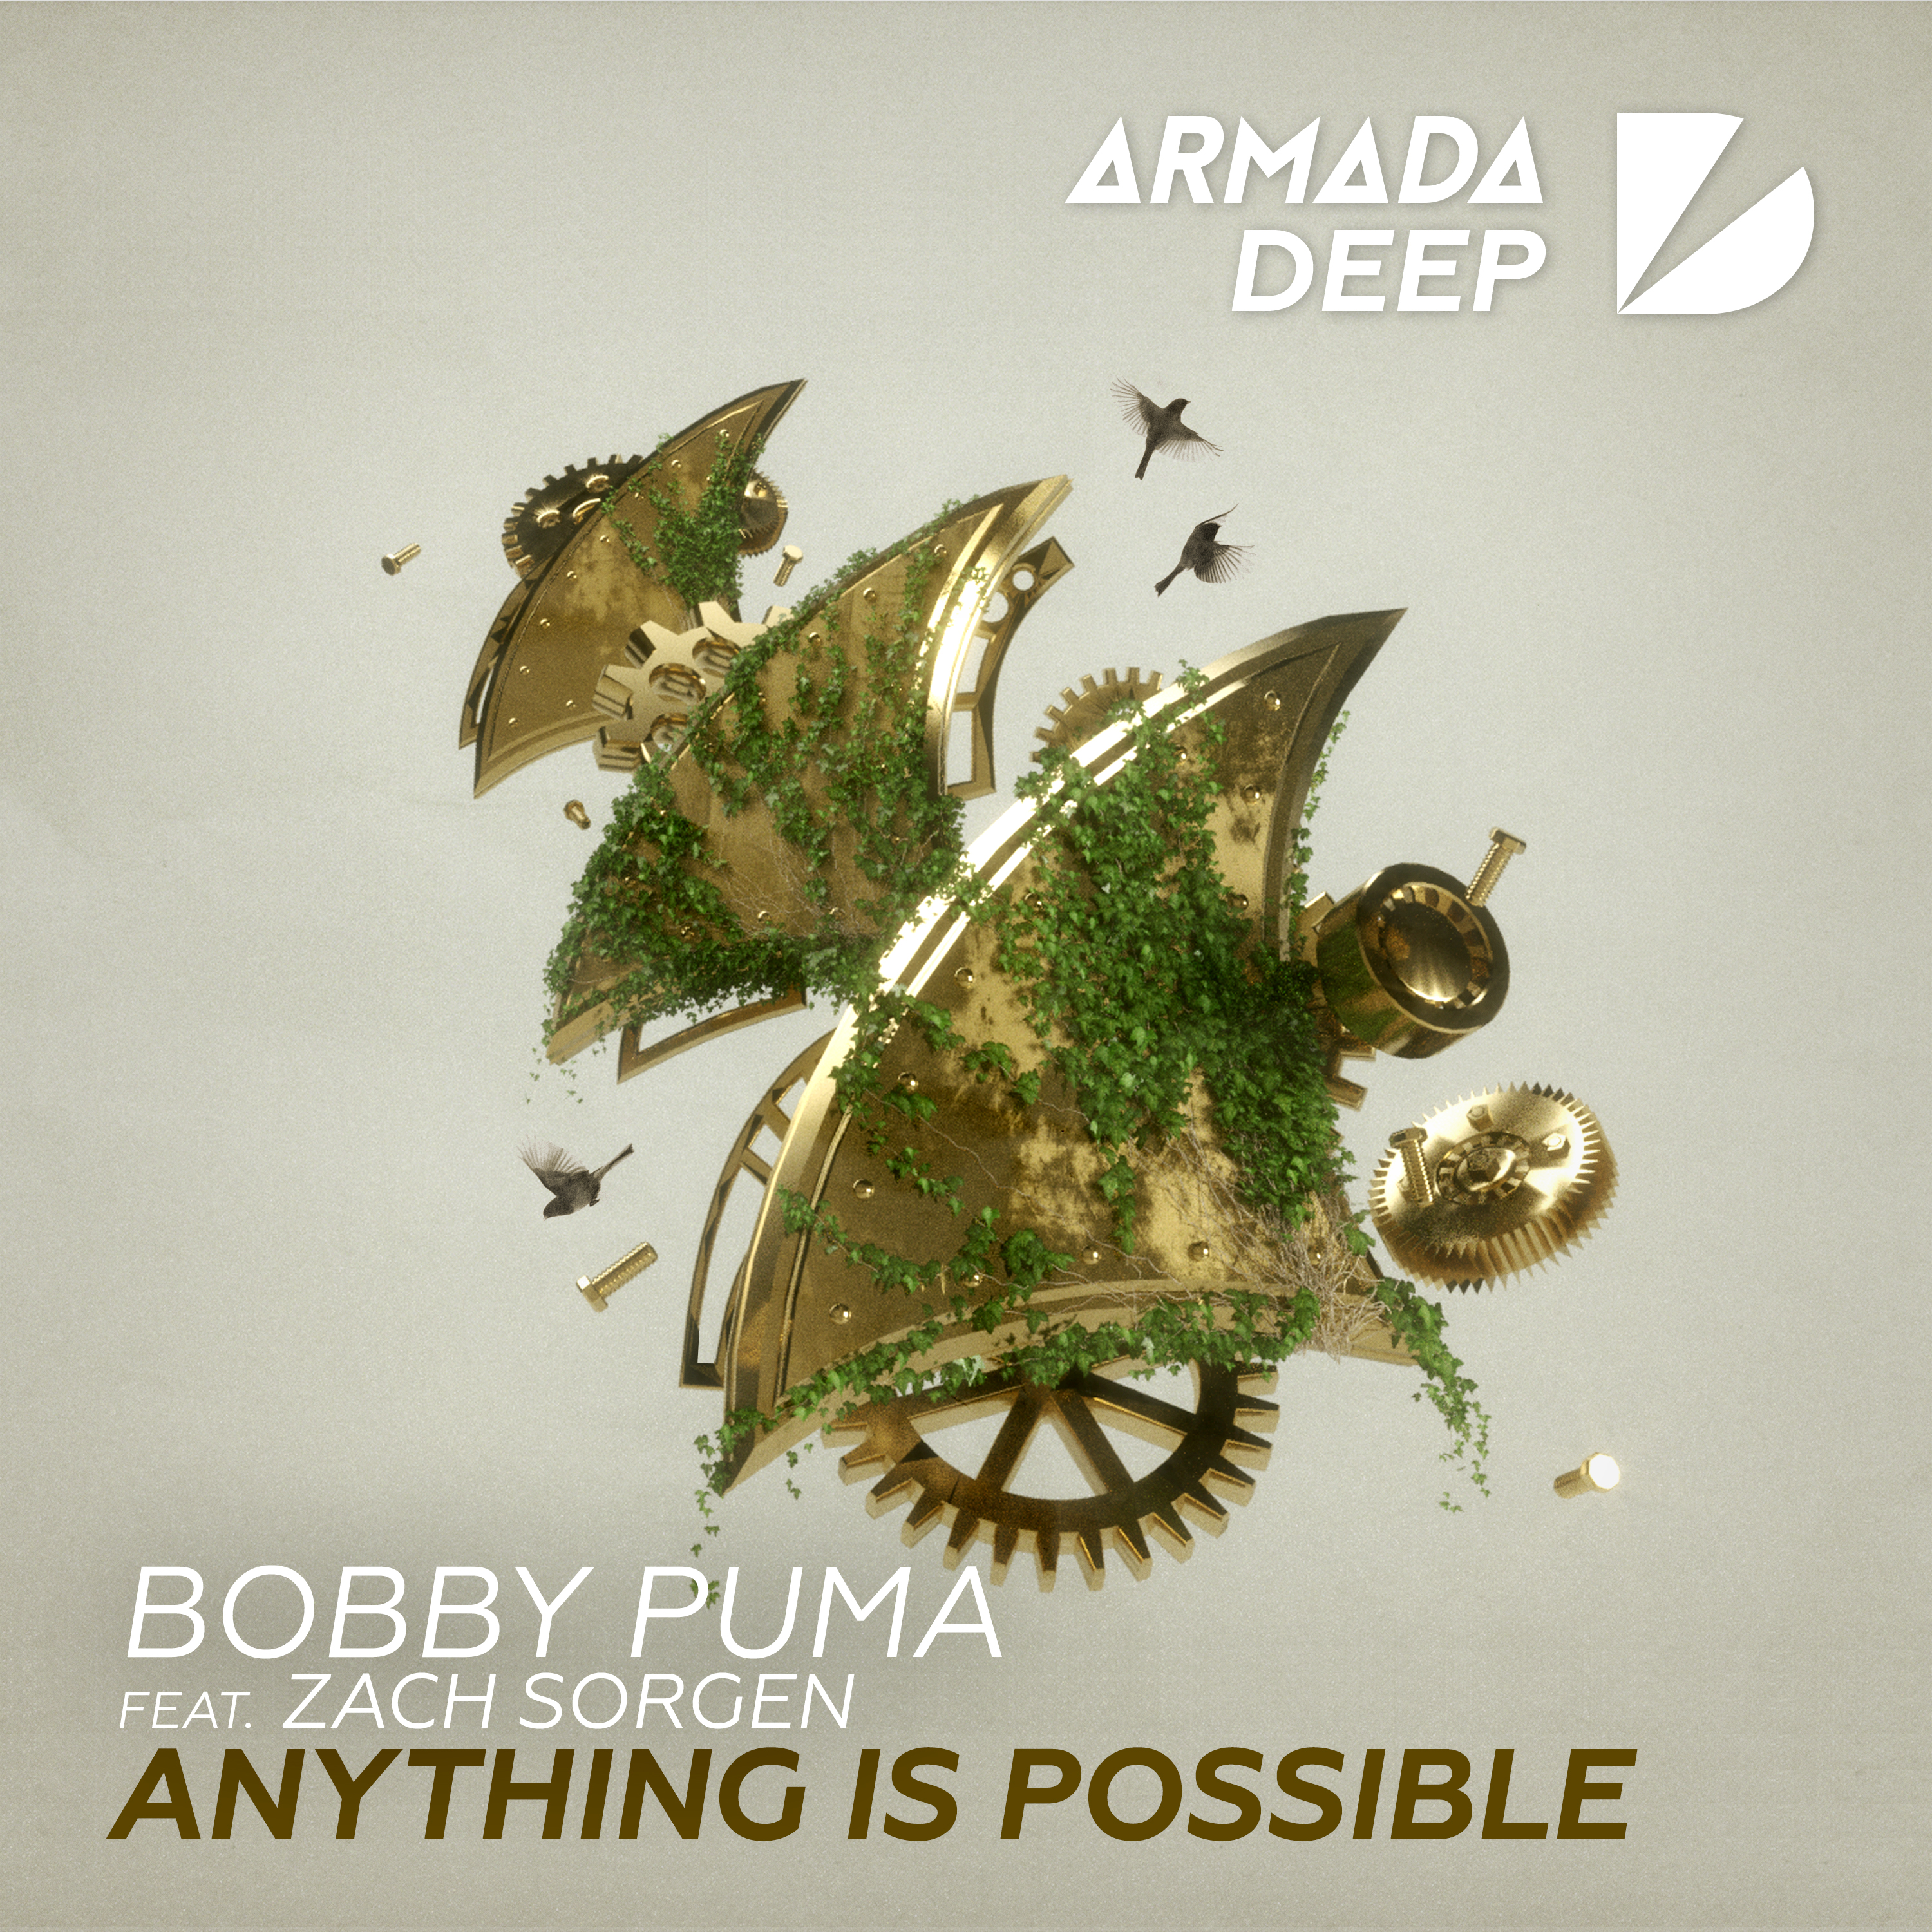 Bobby Puma Gets Deep & Uplifting With “Anything Is Possible” Ft. Zach Sorgen